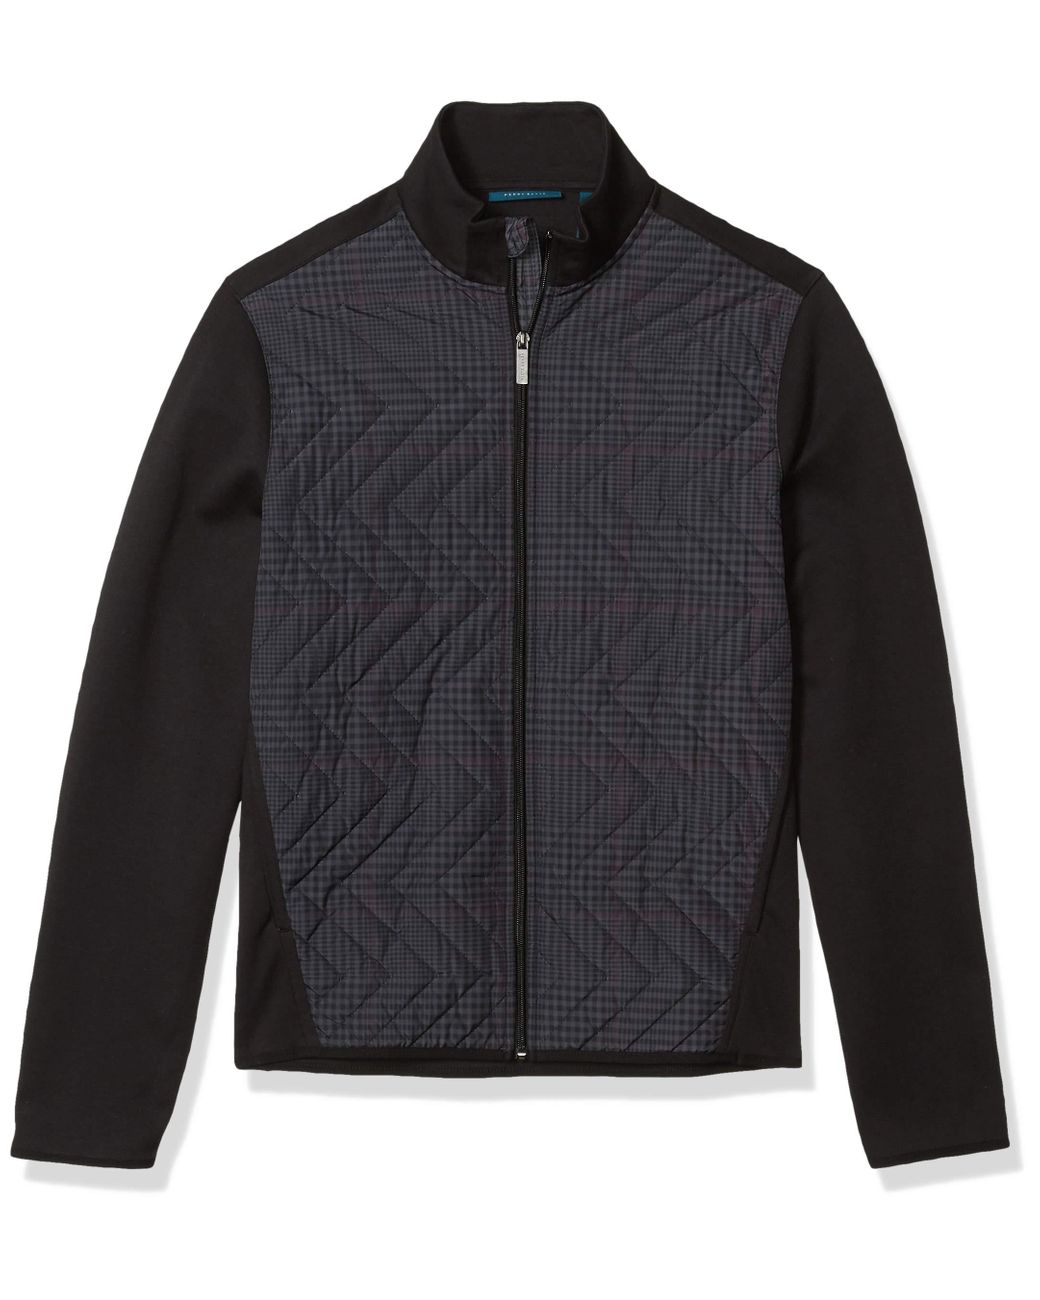 Perry Ellis Synthetic Quilted Nylon Jacket in Black for Men - Lyst